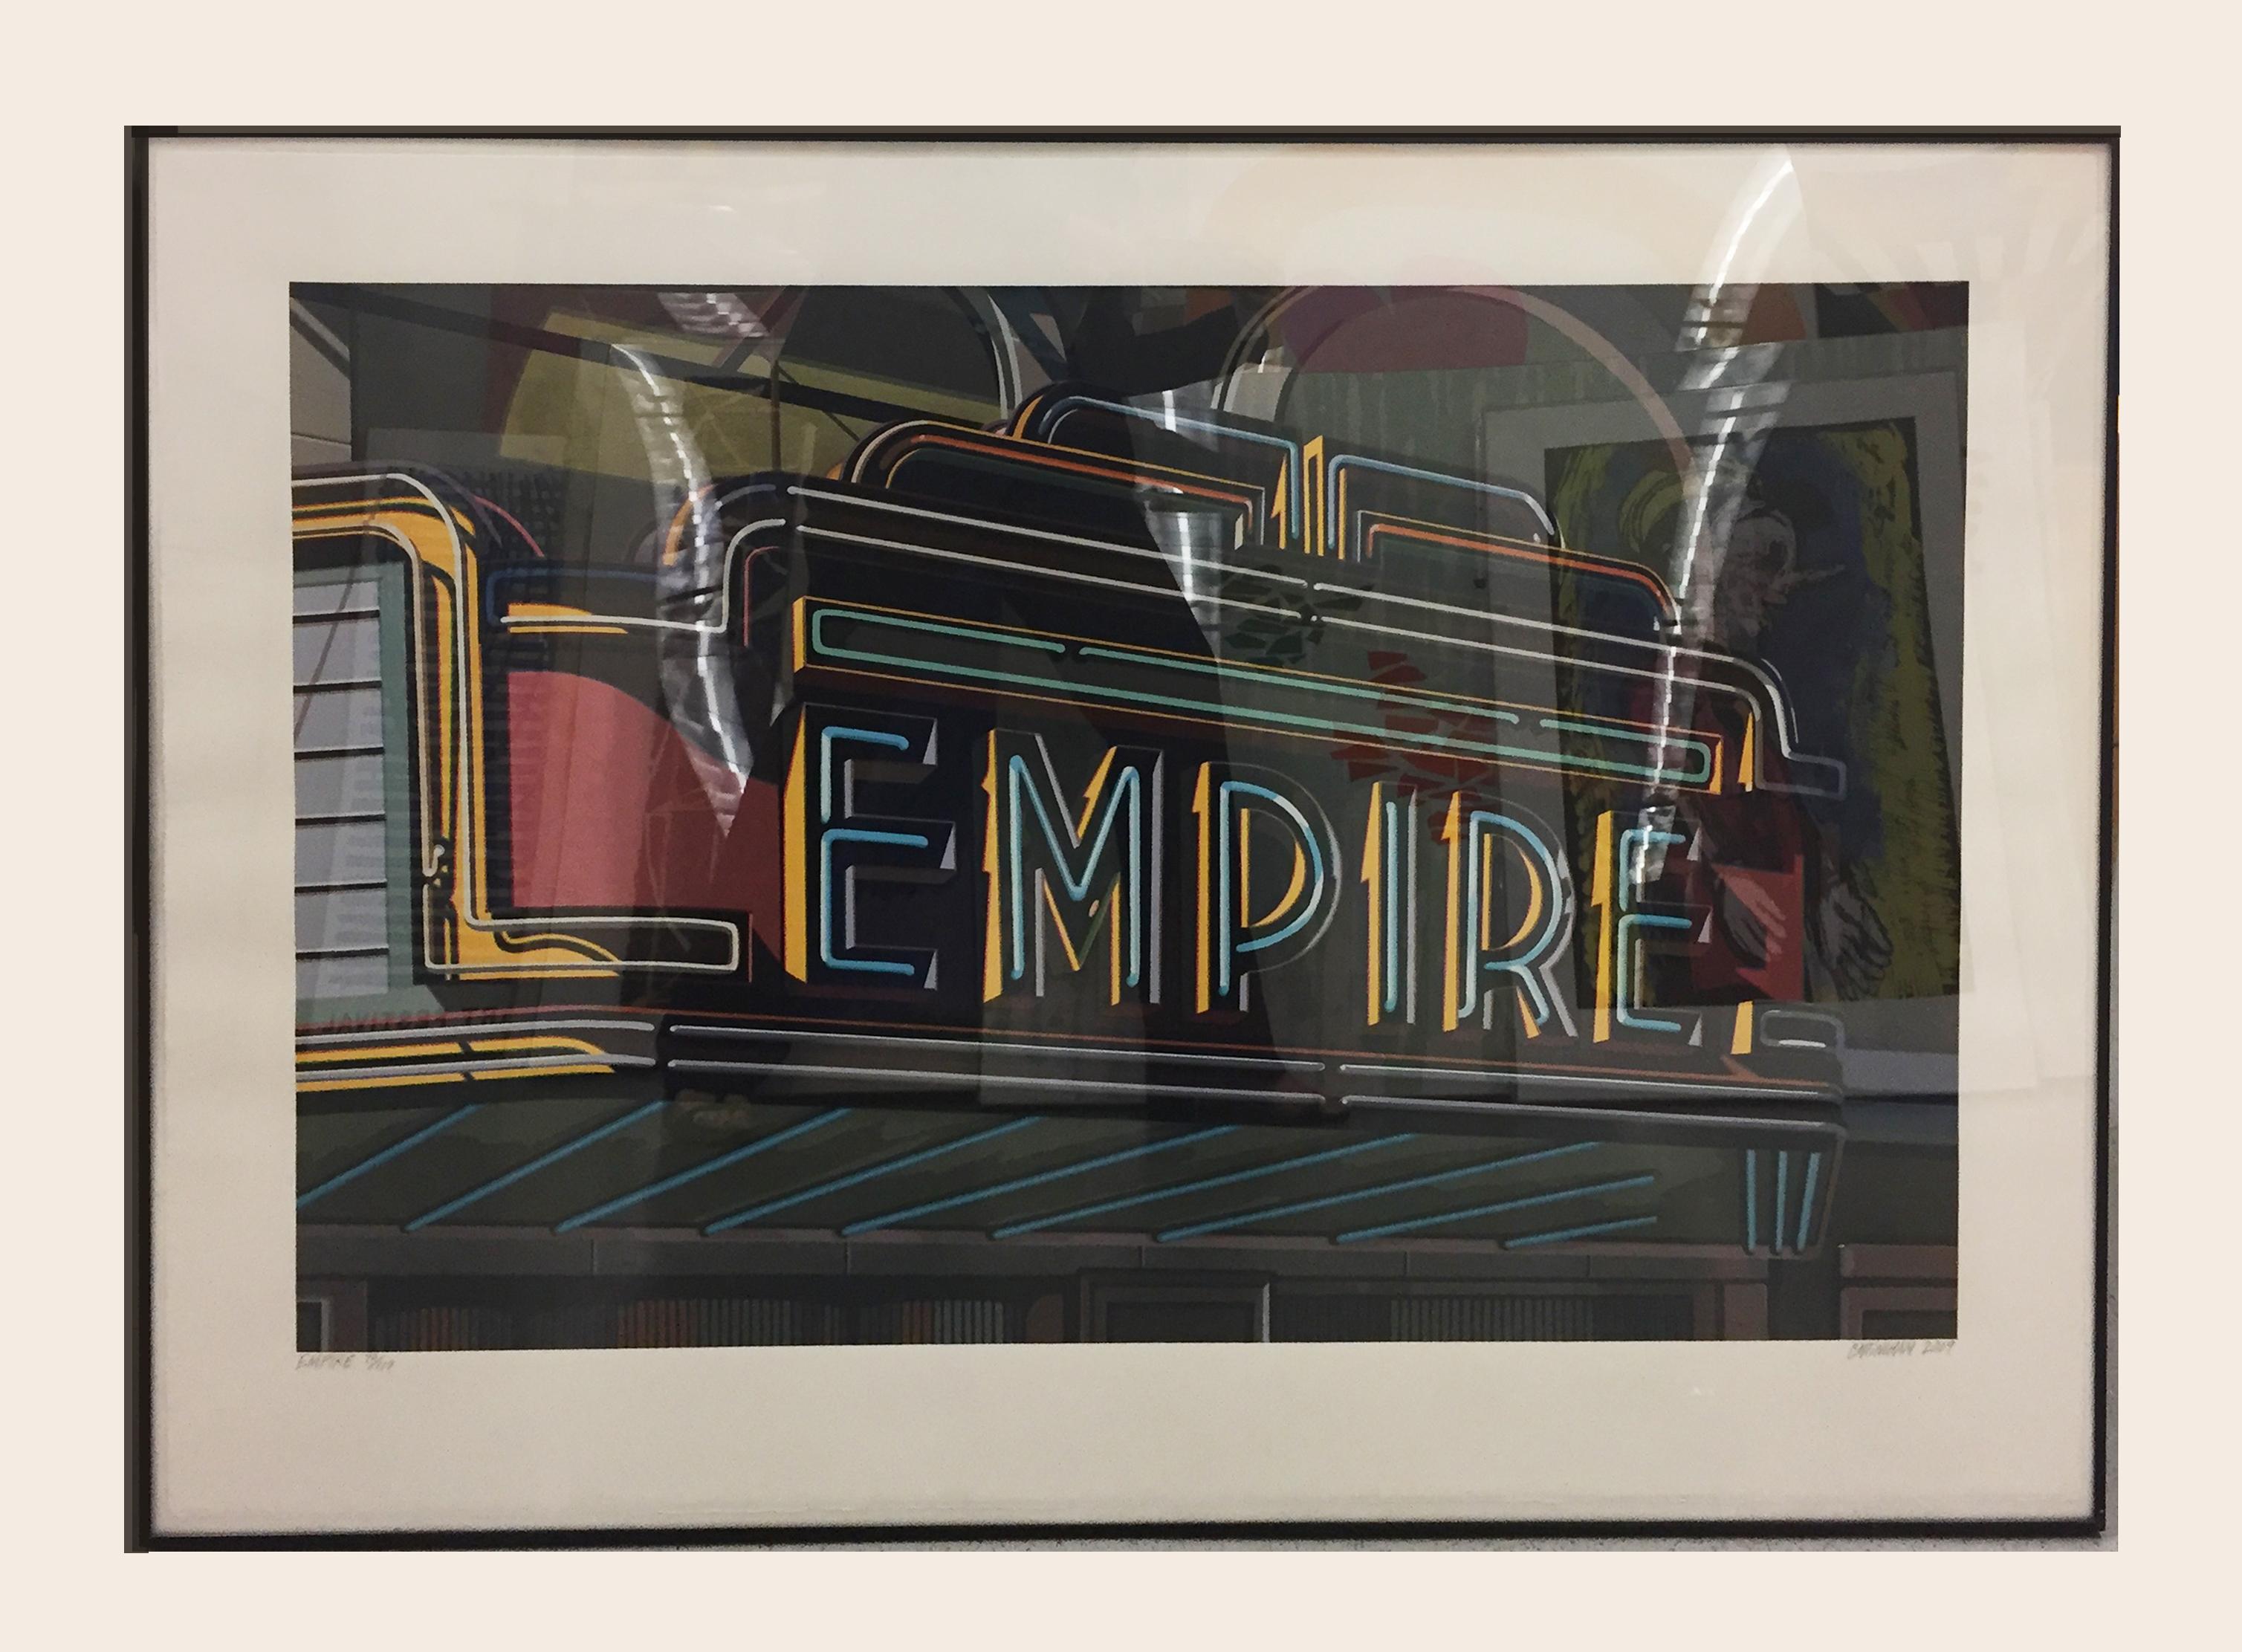 The image comes from the gouache of the same name created in 2008. 

The image depicts the neon marquee of the Empire Theatre, a cinema in Montgomery, Alabama. The theatre is the famous site where Rosa Parks started the Civil Rights